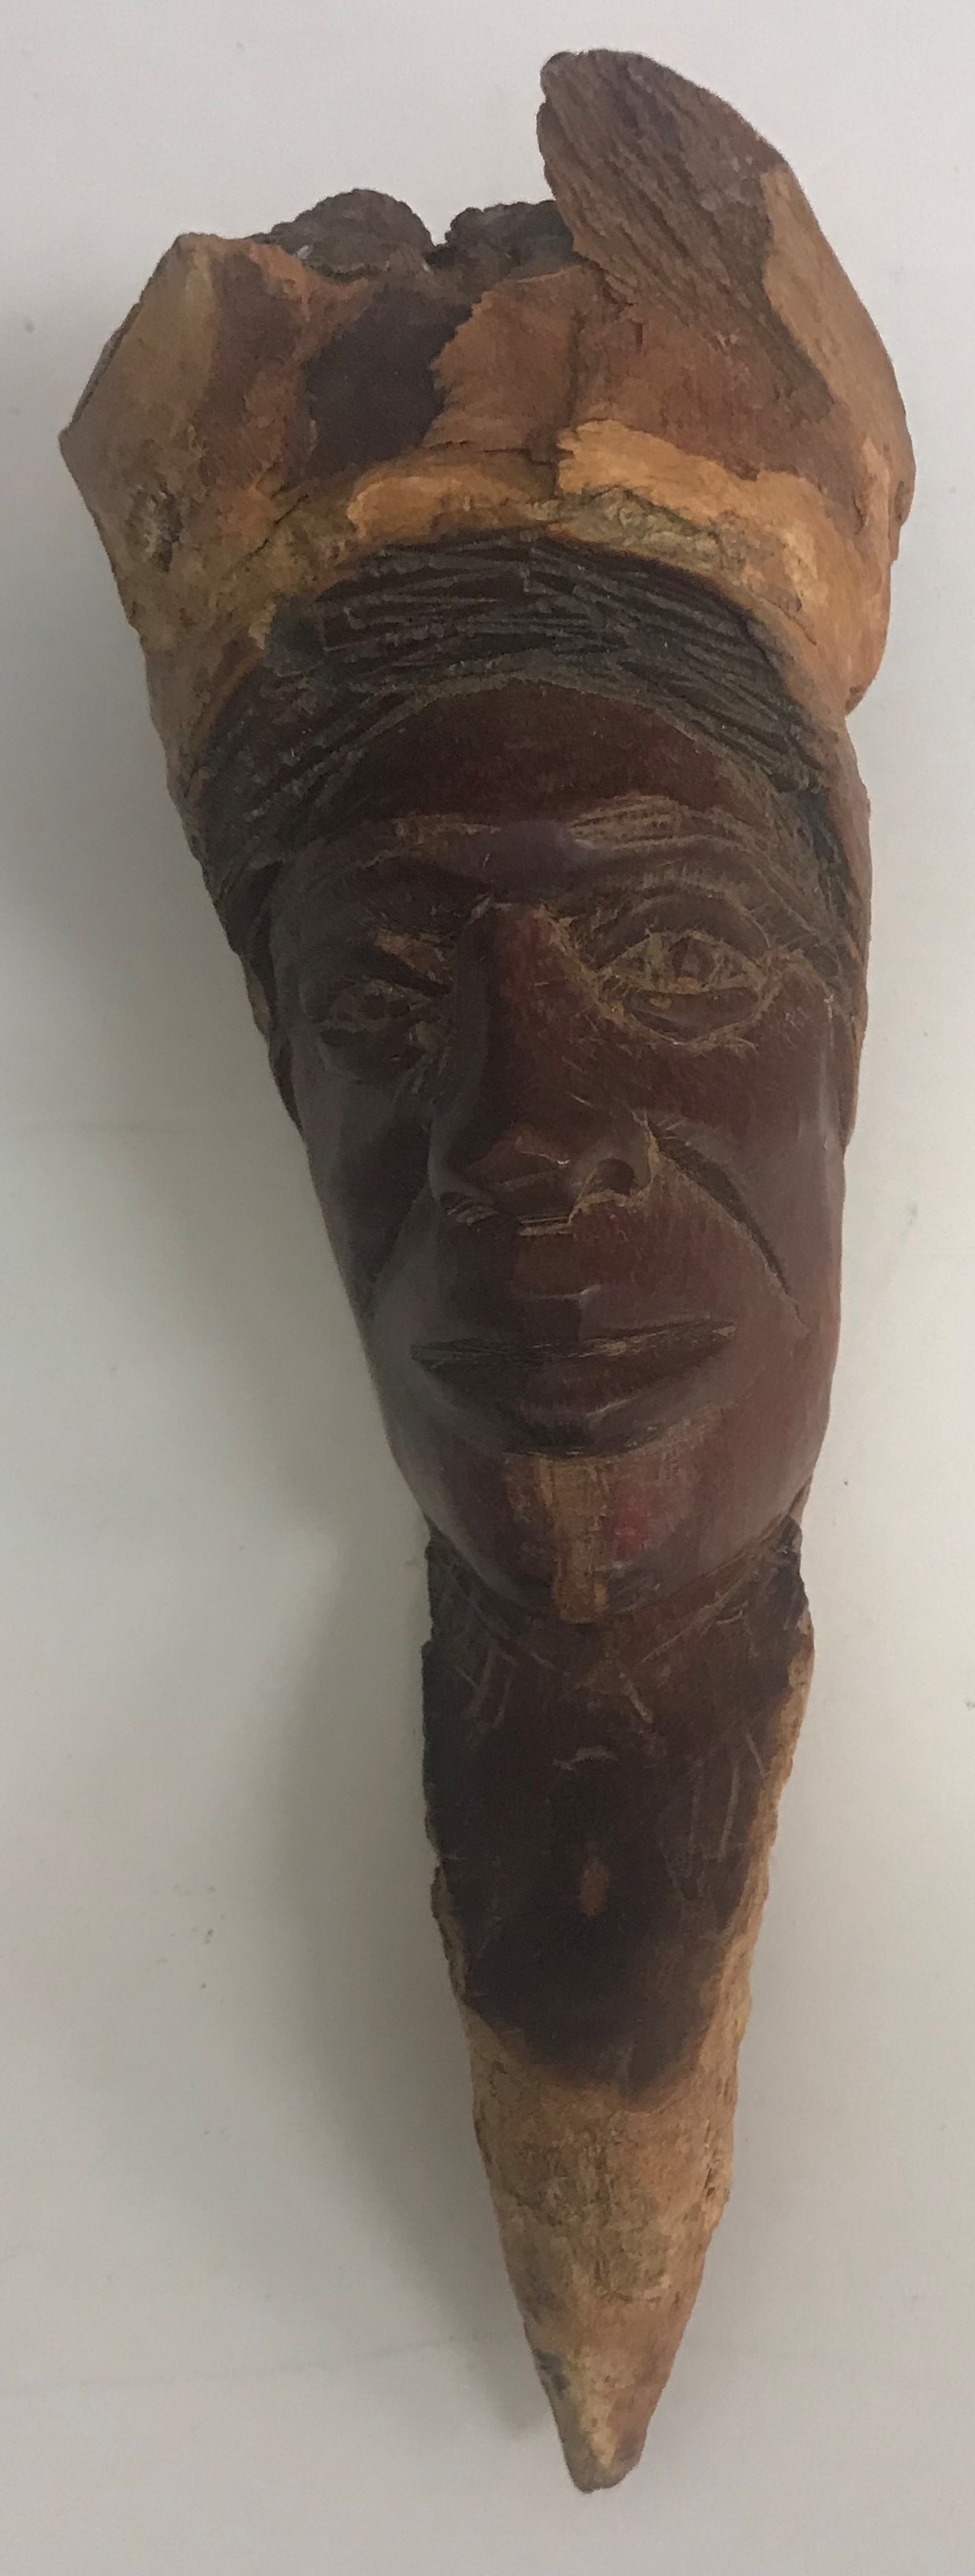 A West African "Dan" mask with real hair - Image 2 of 2